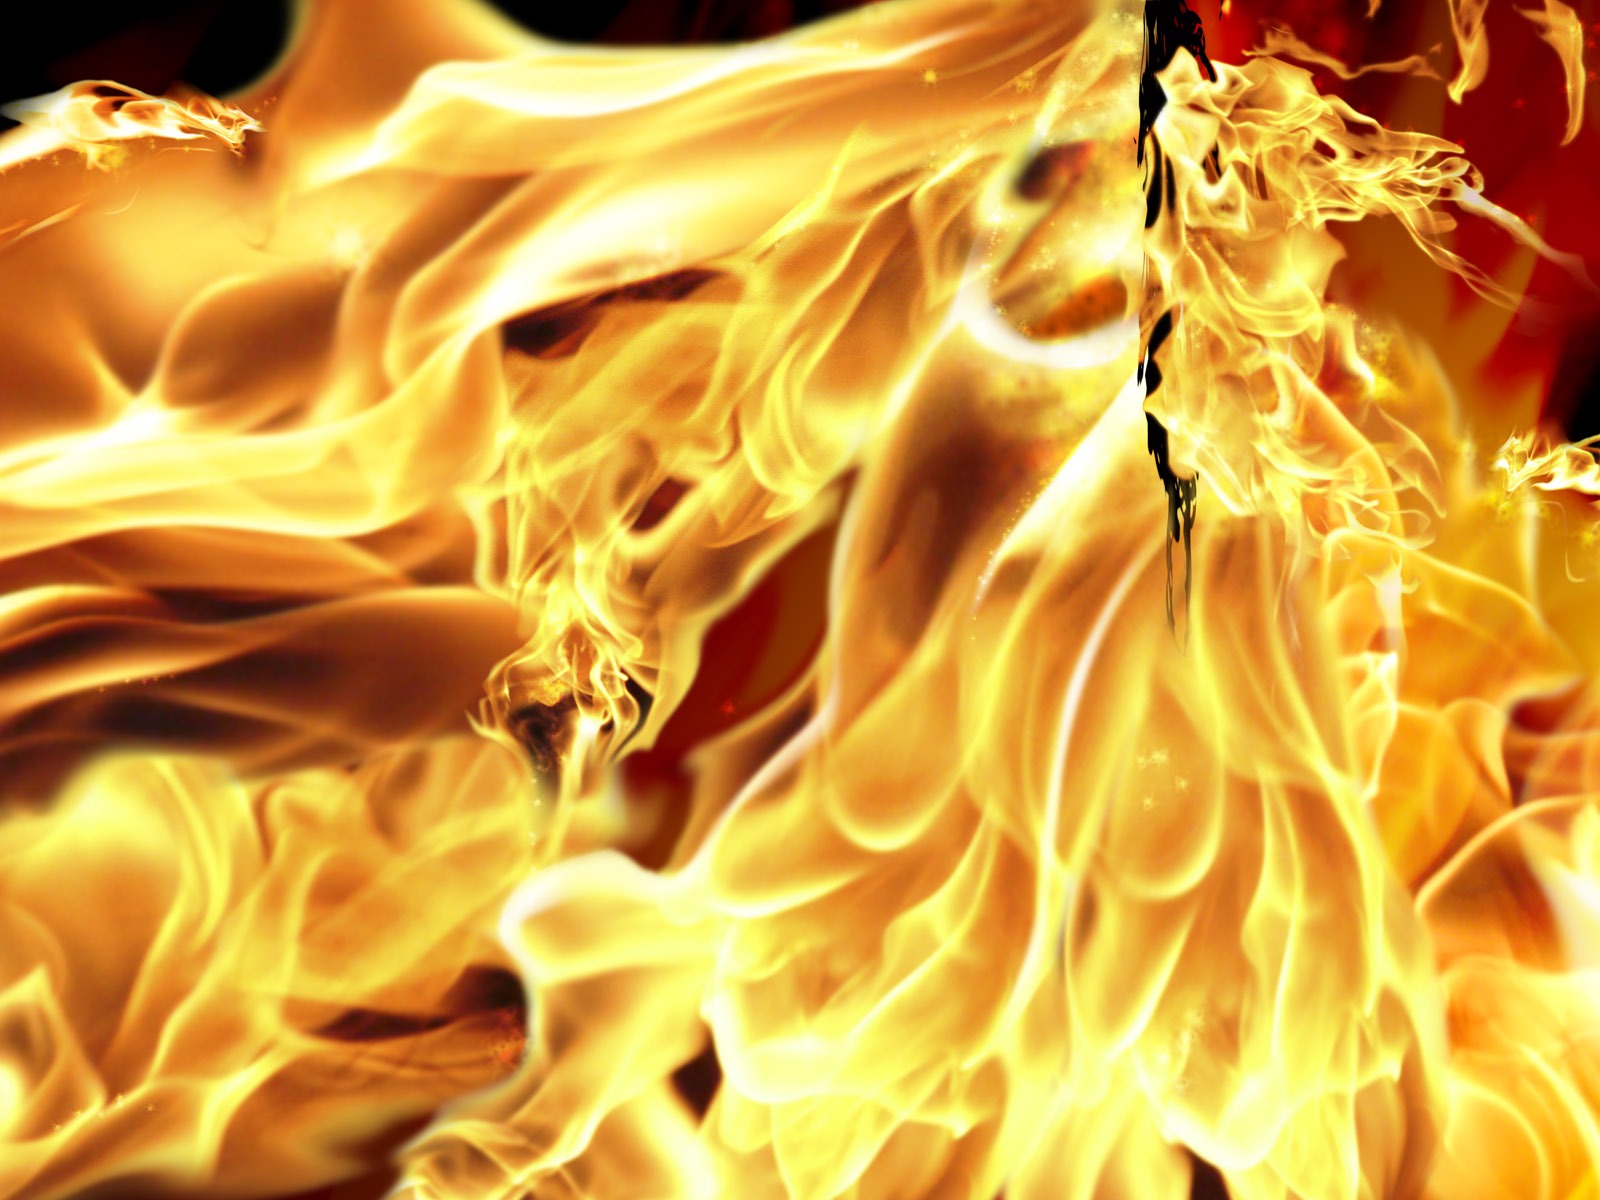 Flame Feature HD Wallpaper #2 - 1600x1200